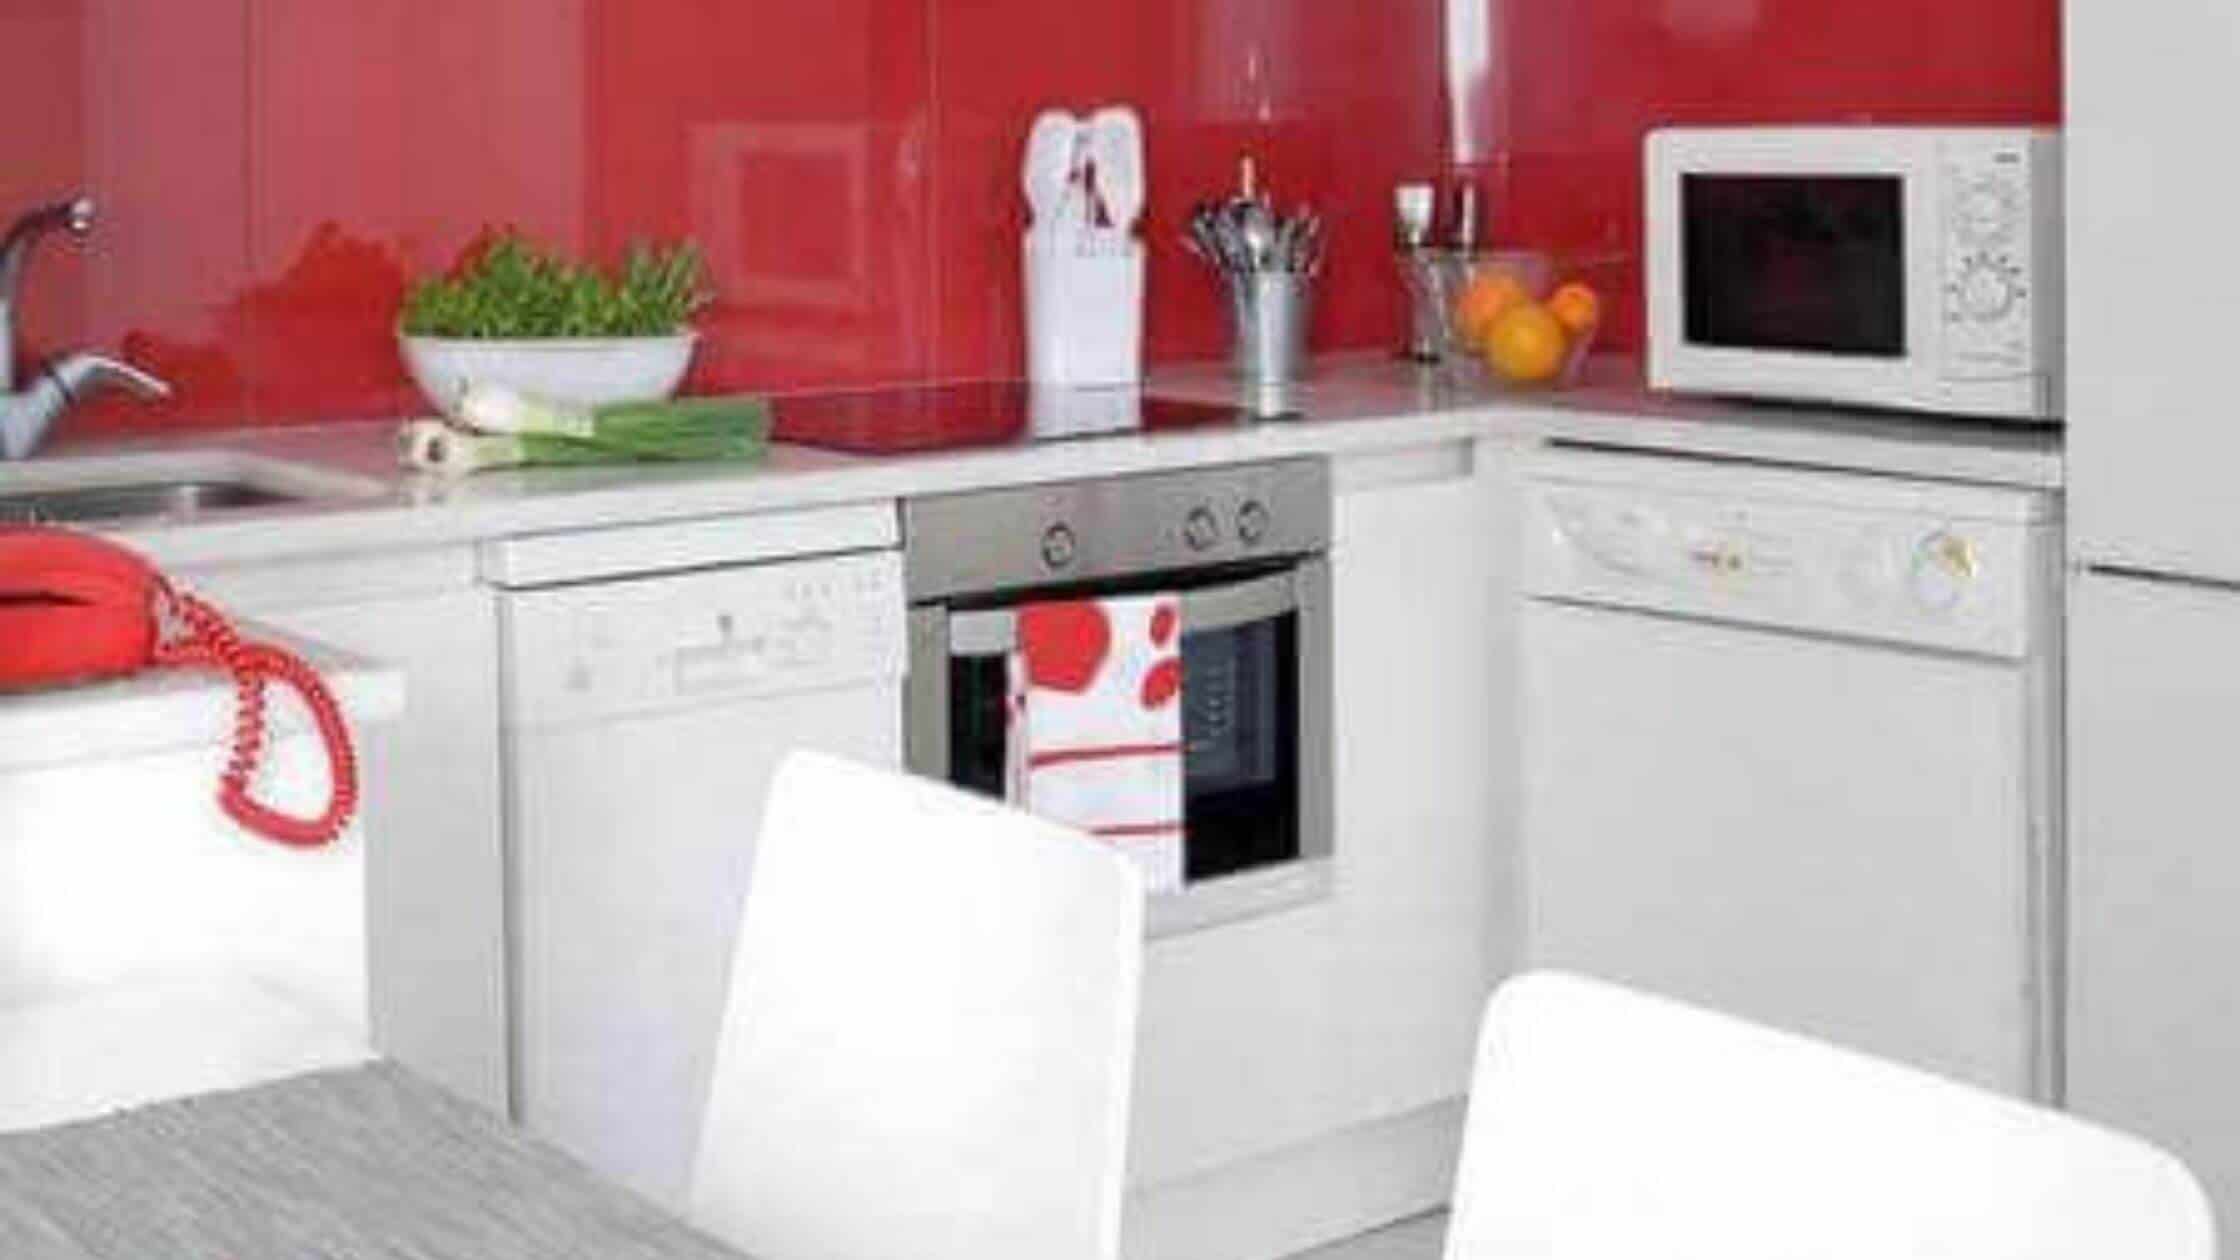 Red and White Kitchen Designs